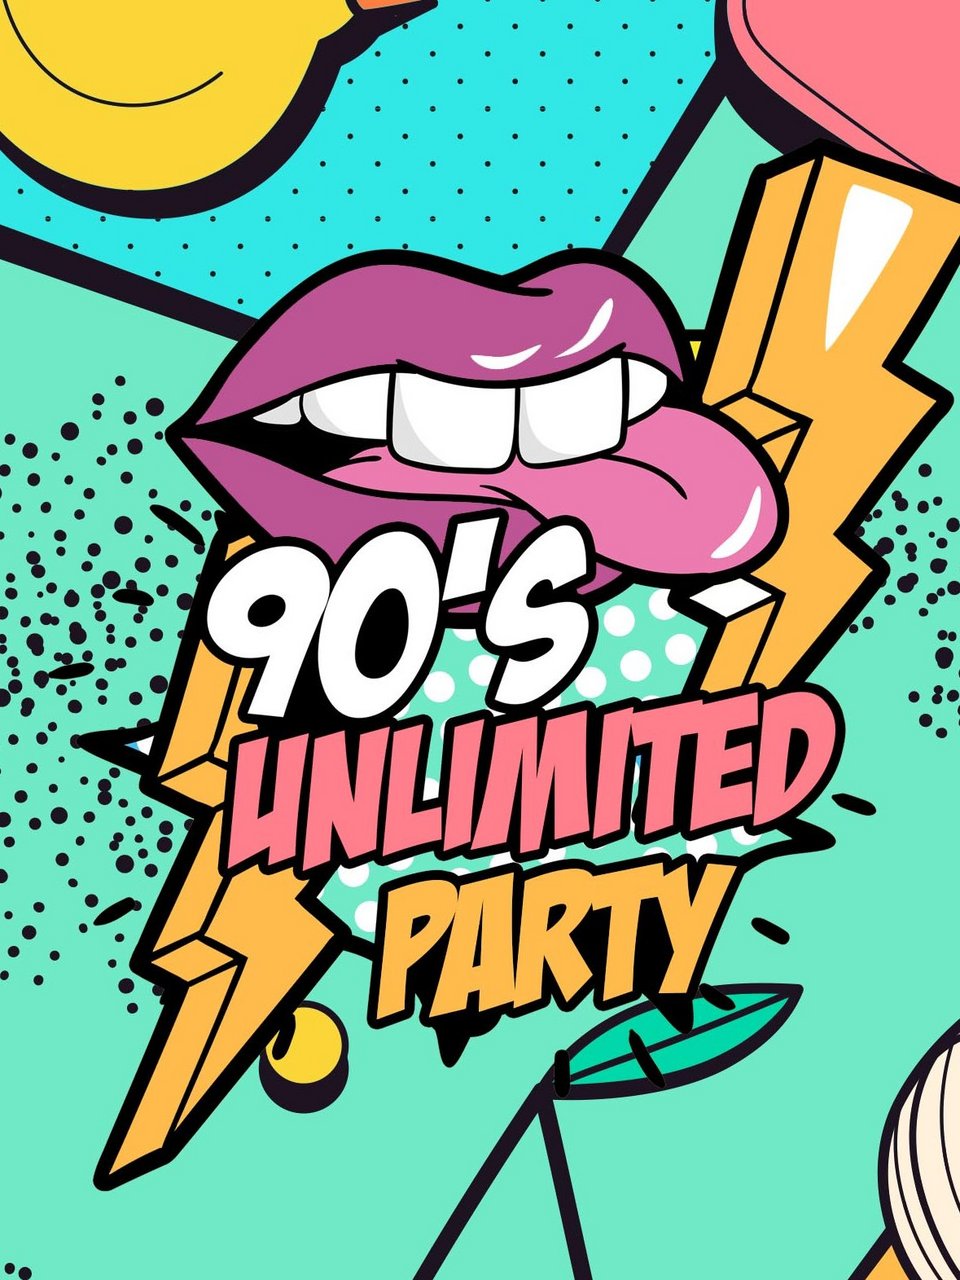 90s Unlimited Party